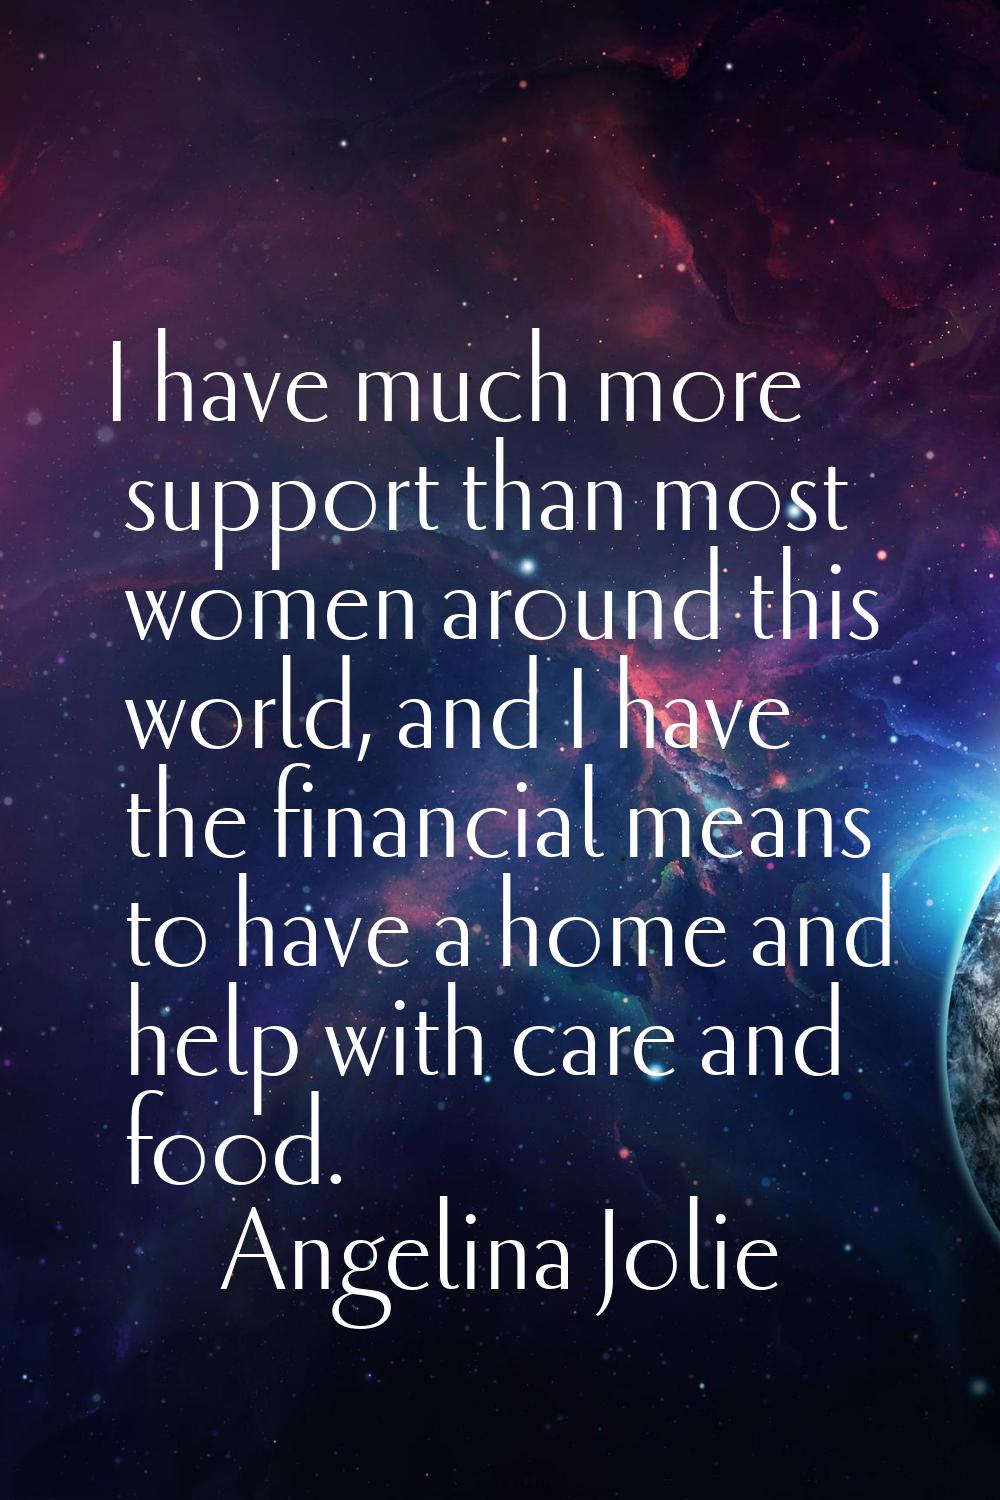 I have much more support than most women around this world, and I have the financial means to have 